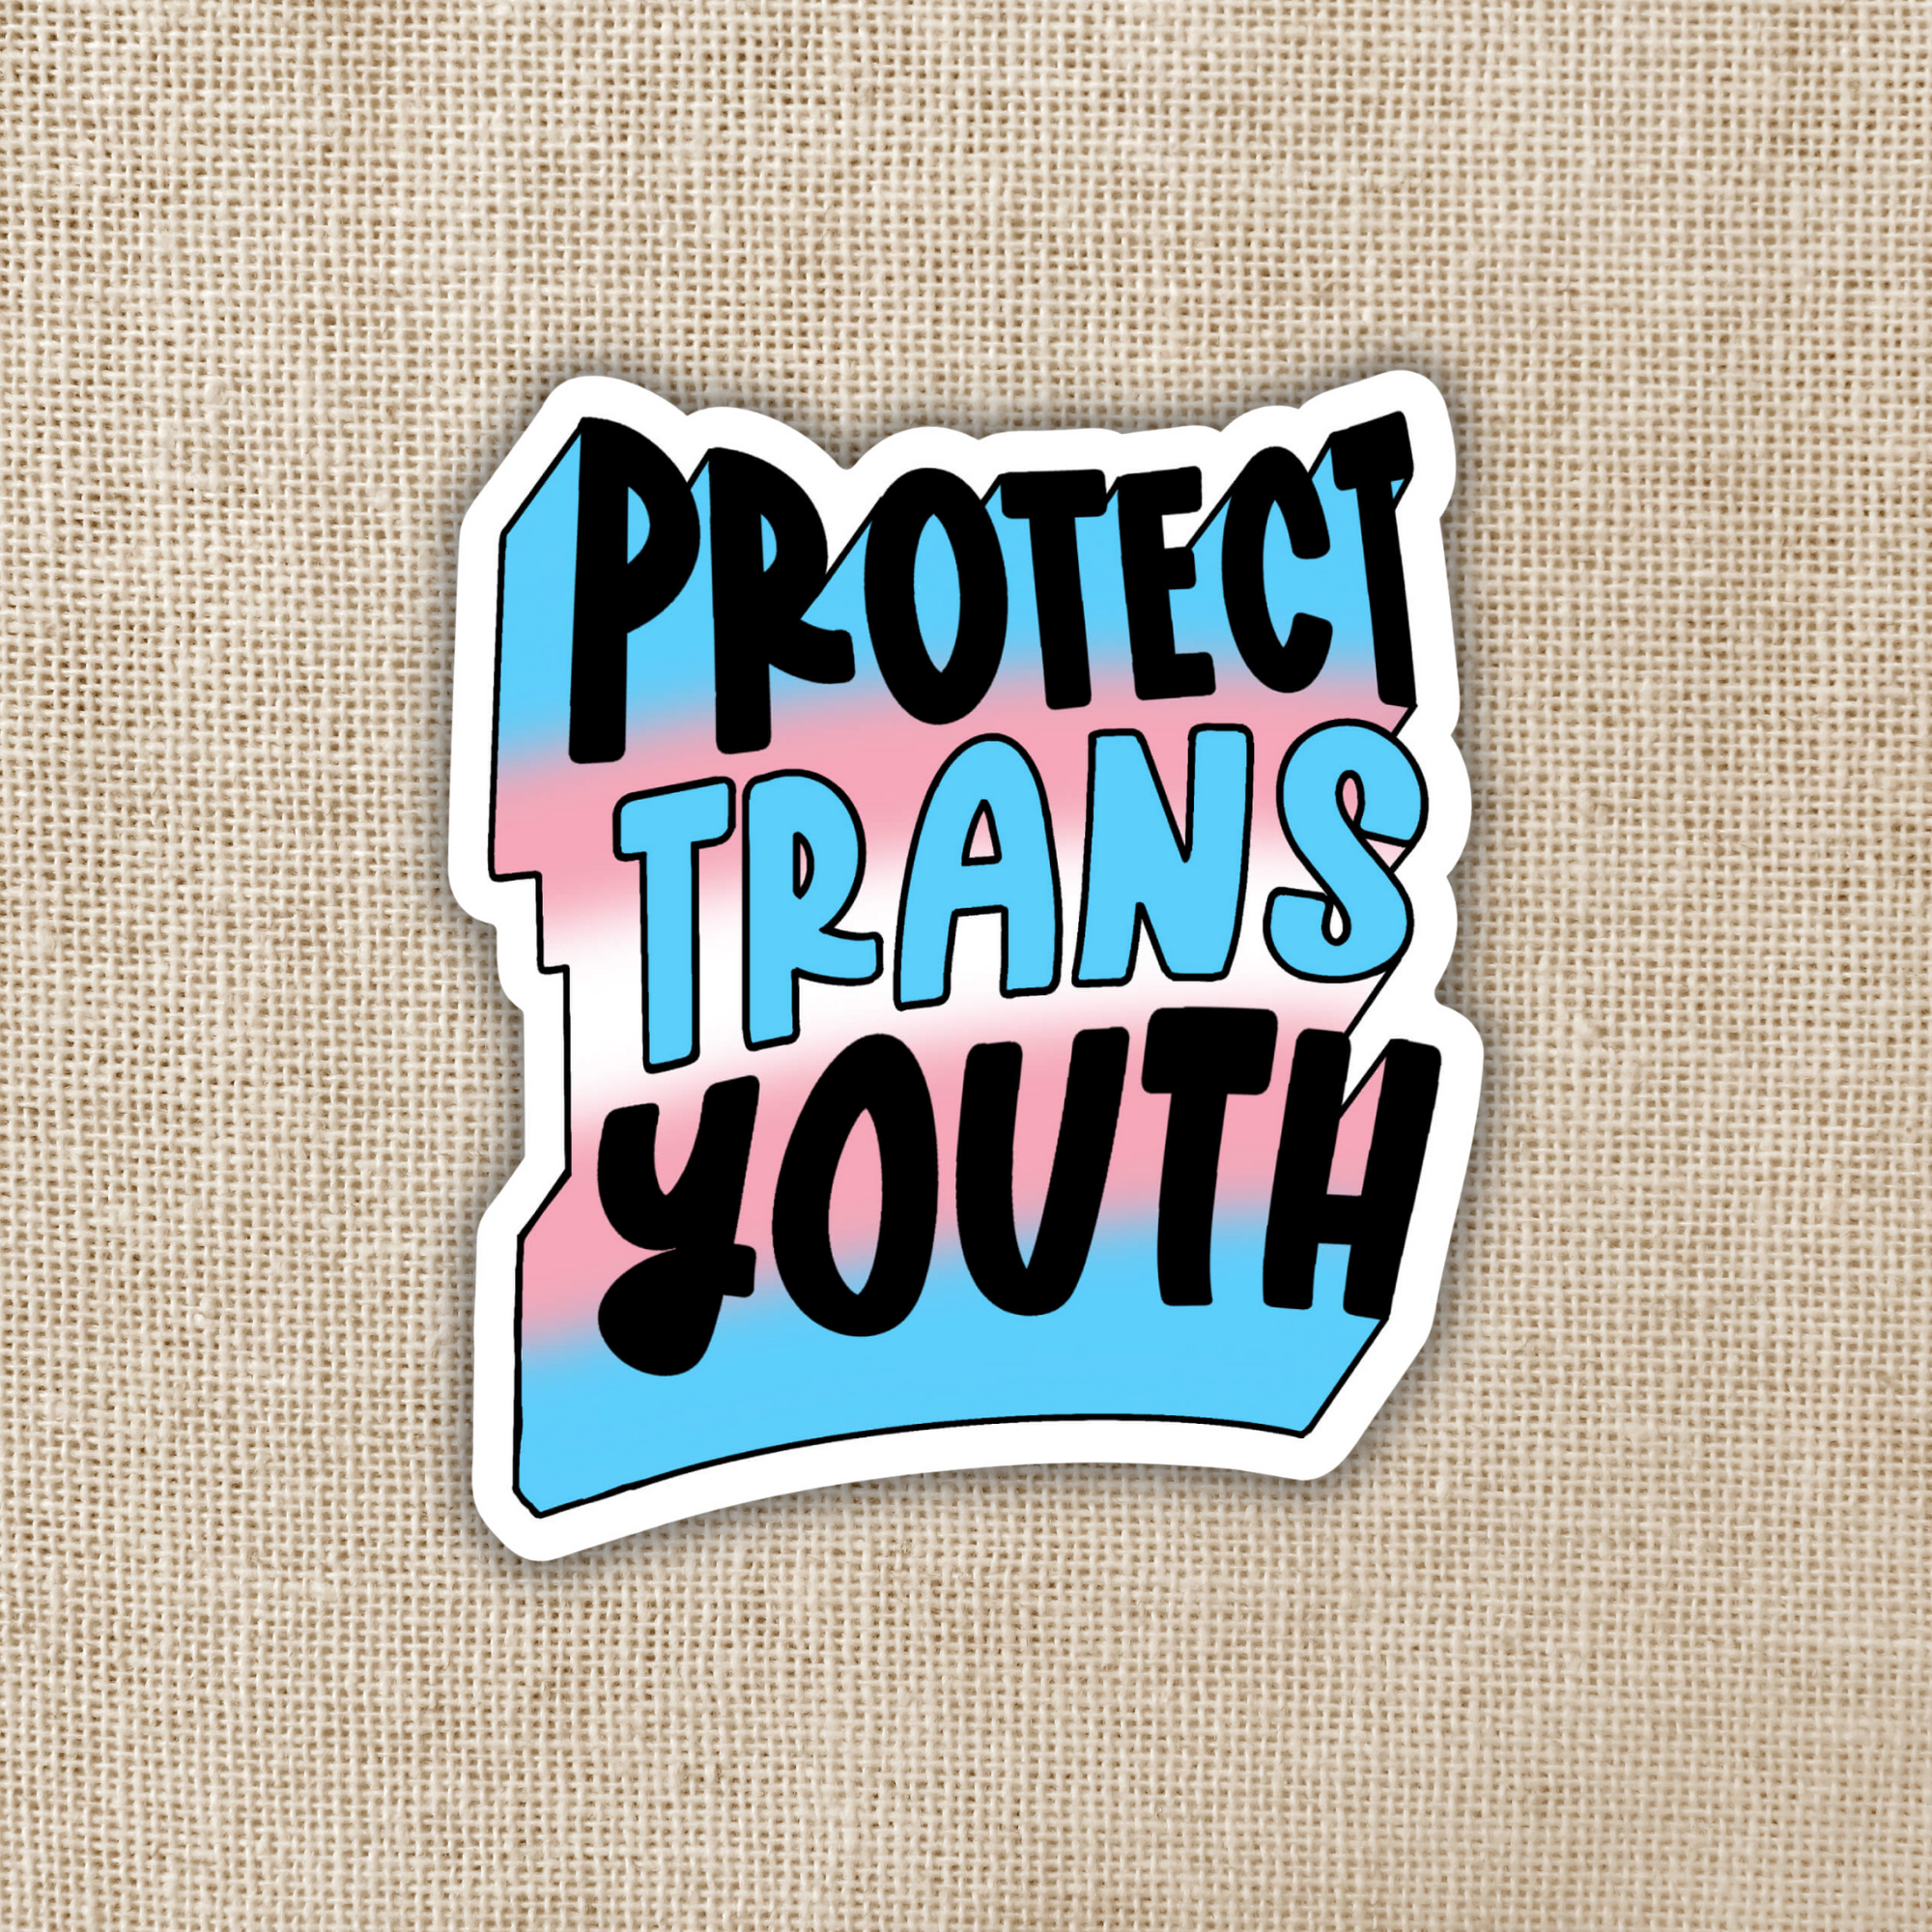 Protect Trans Youth Sticker